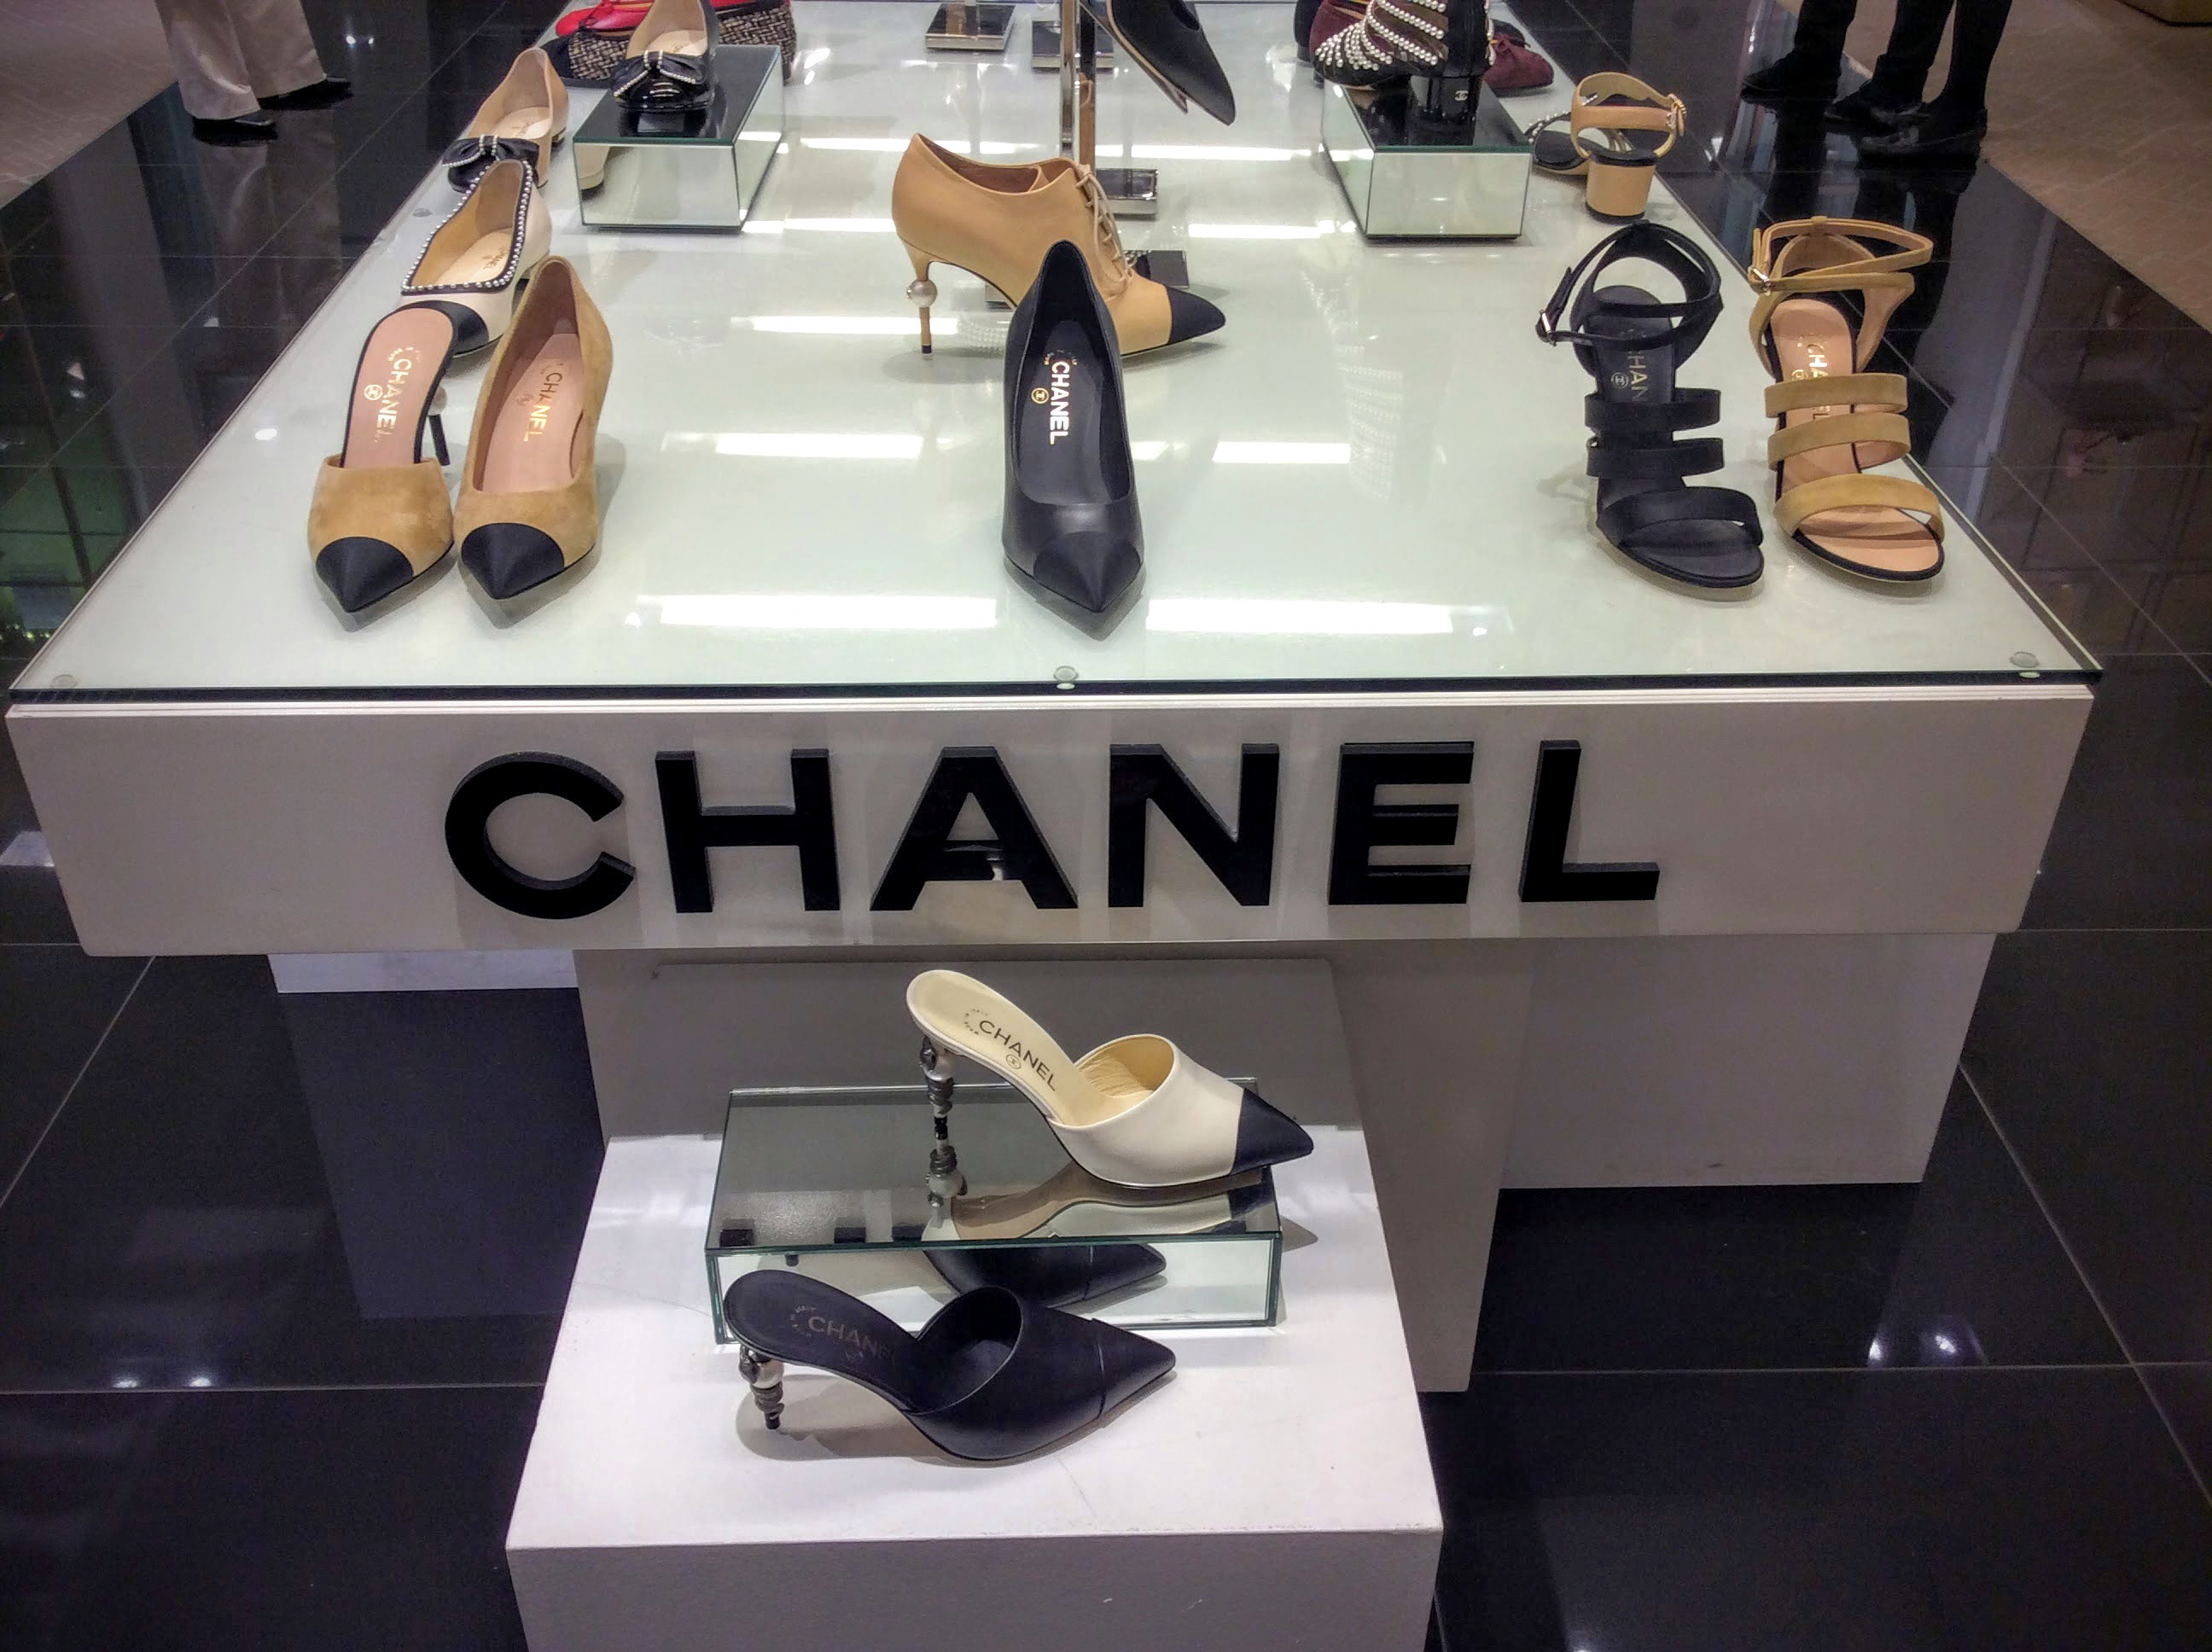 Chanel Trunk Show  Bloomingdales 59th Street  deals  pulsd NYC